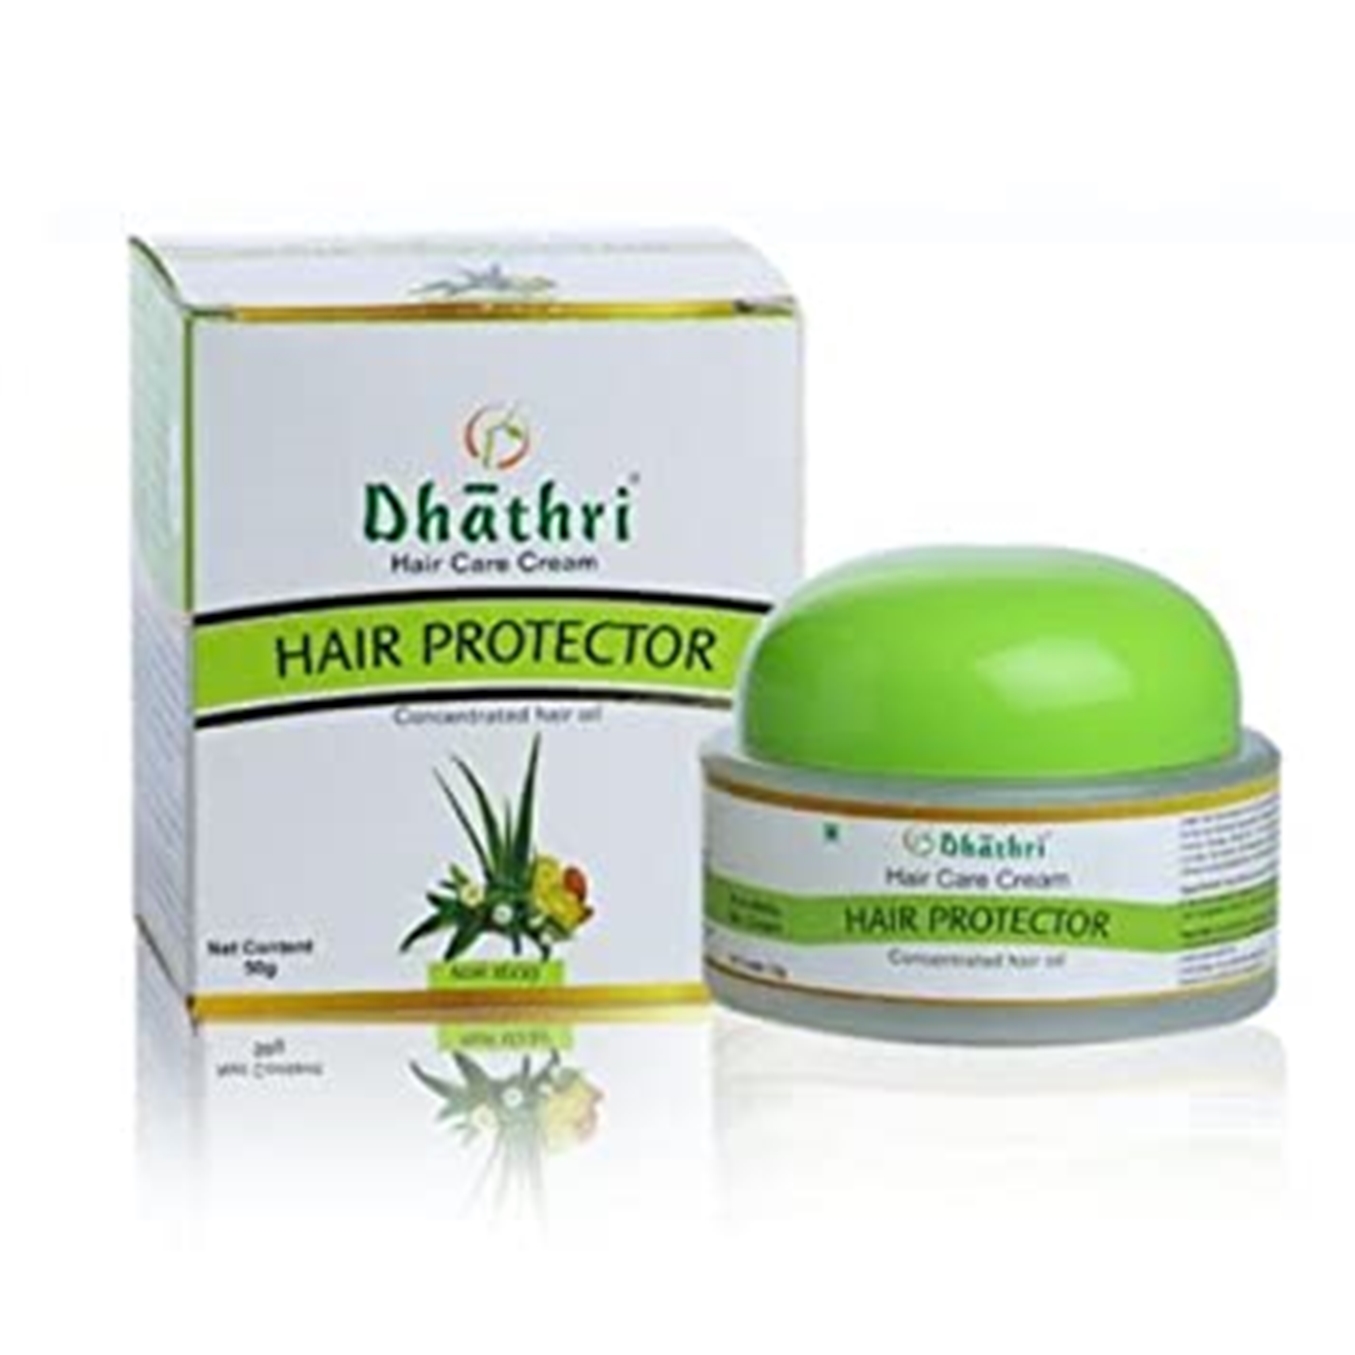 Dhathri Hair Care Herbal Oil Review  My little space